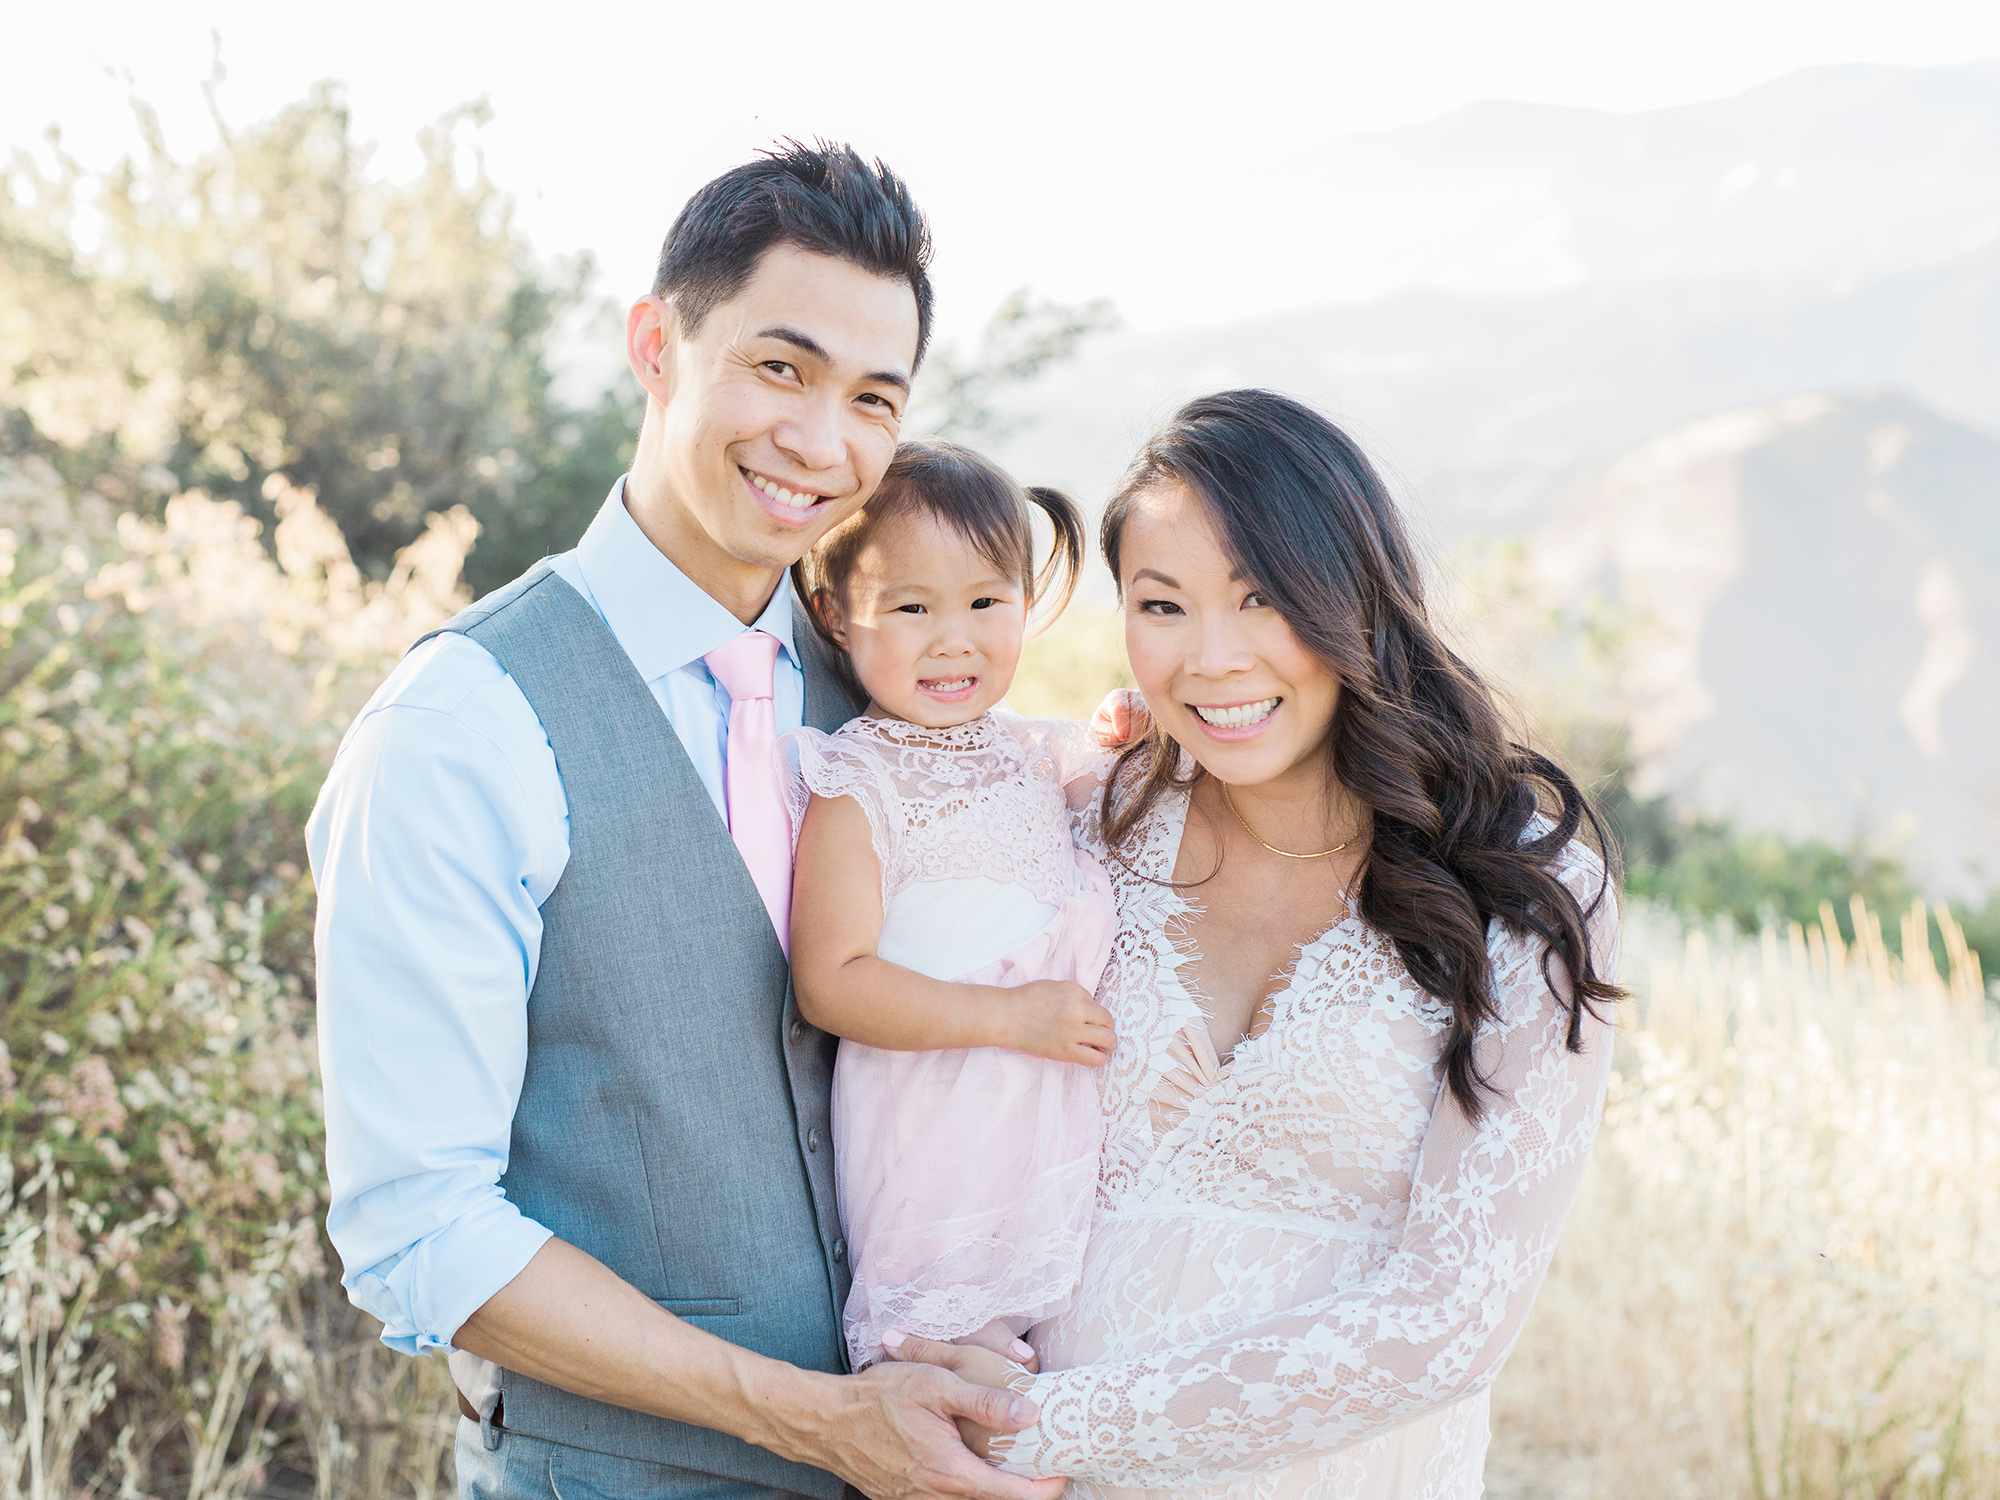 Family maternity session by Dallas maternity photographer Tenth & Grace.